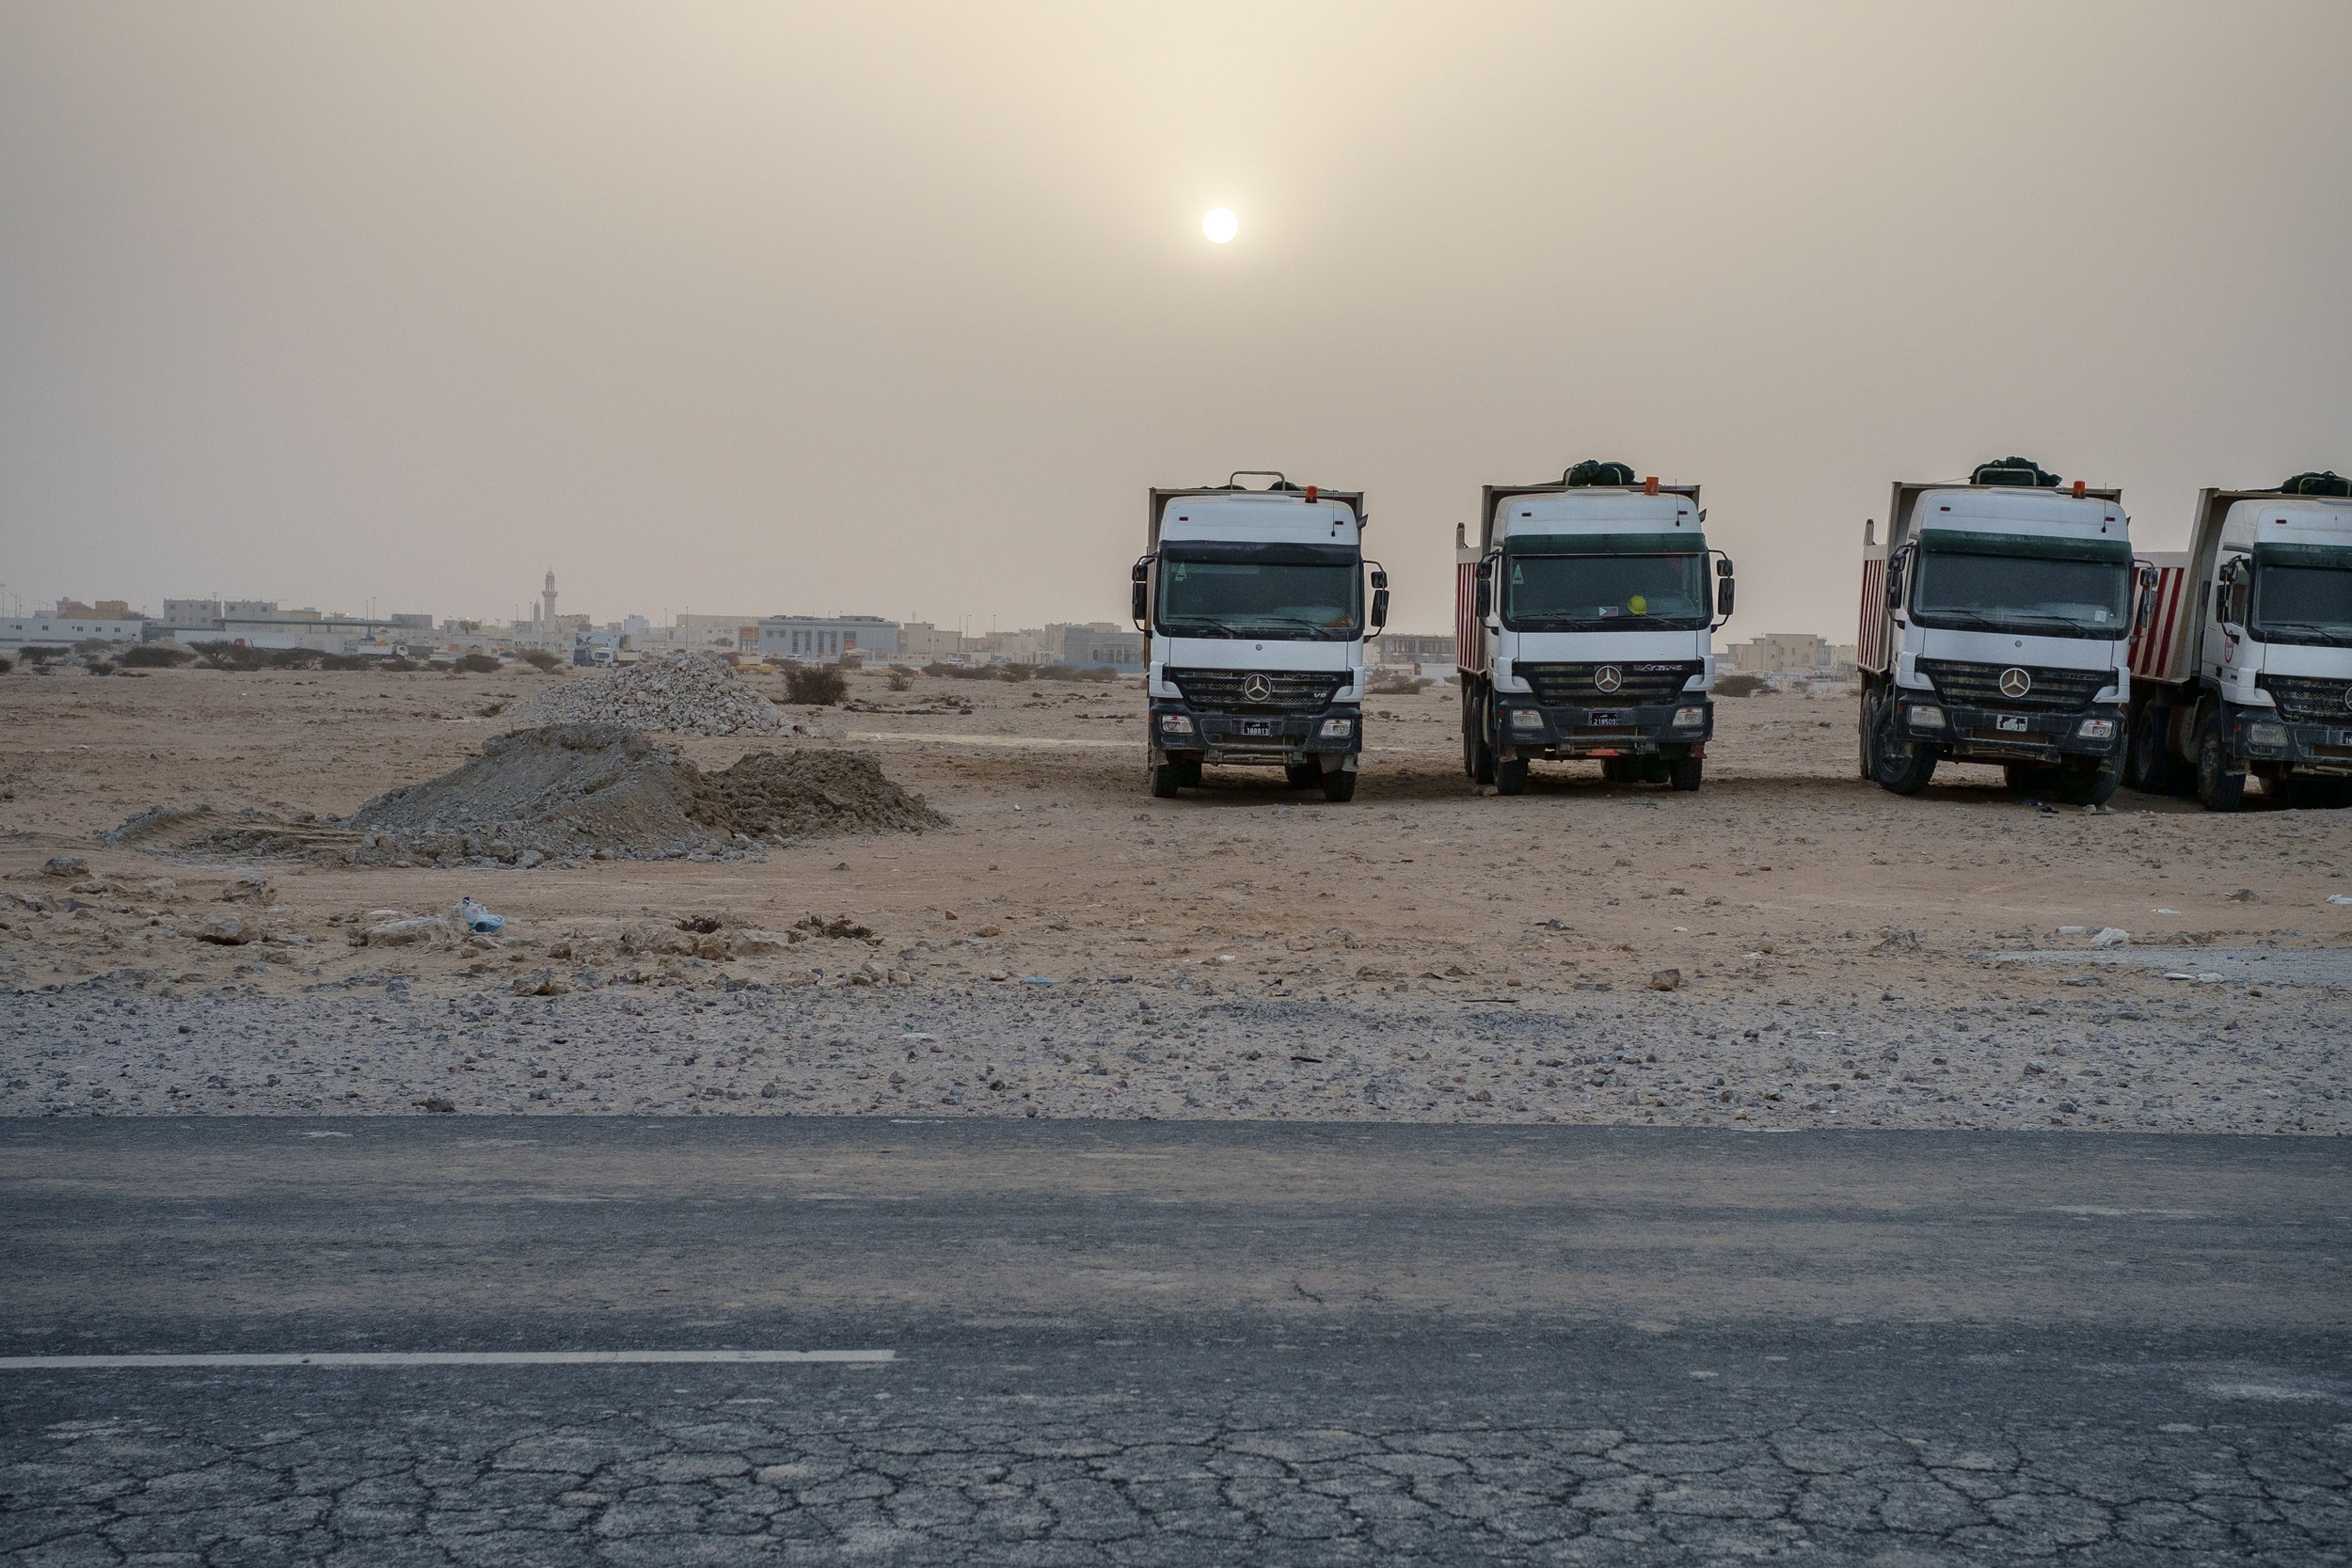  Dumpster trucks are lined up on their day off as the sun sets behind them. Desert dust is often in the air creating an other-worldly atmosphere. 